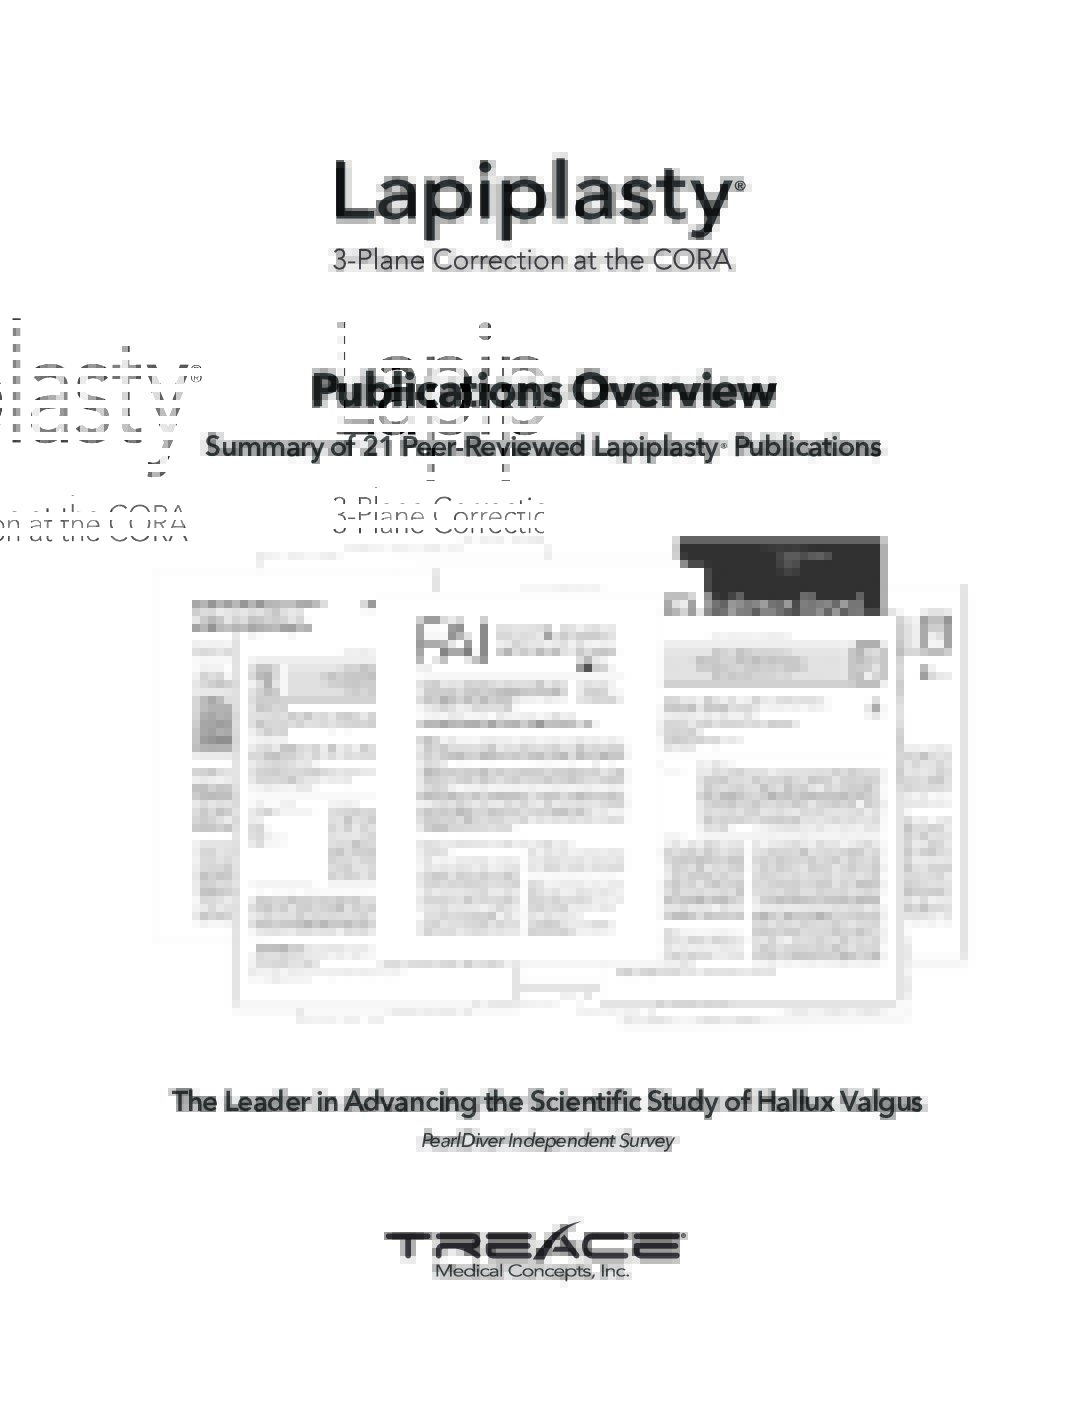 Lapiplasty® Publication Overview